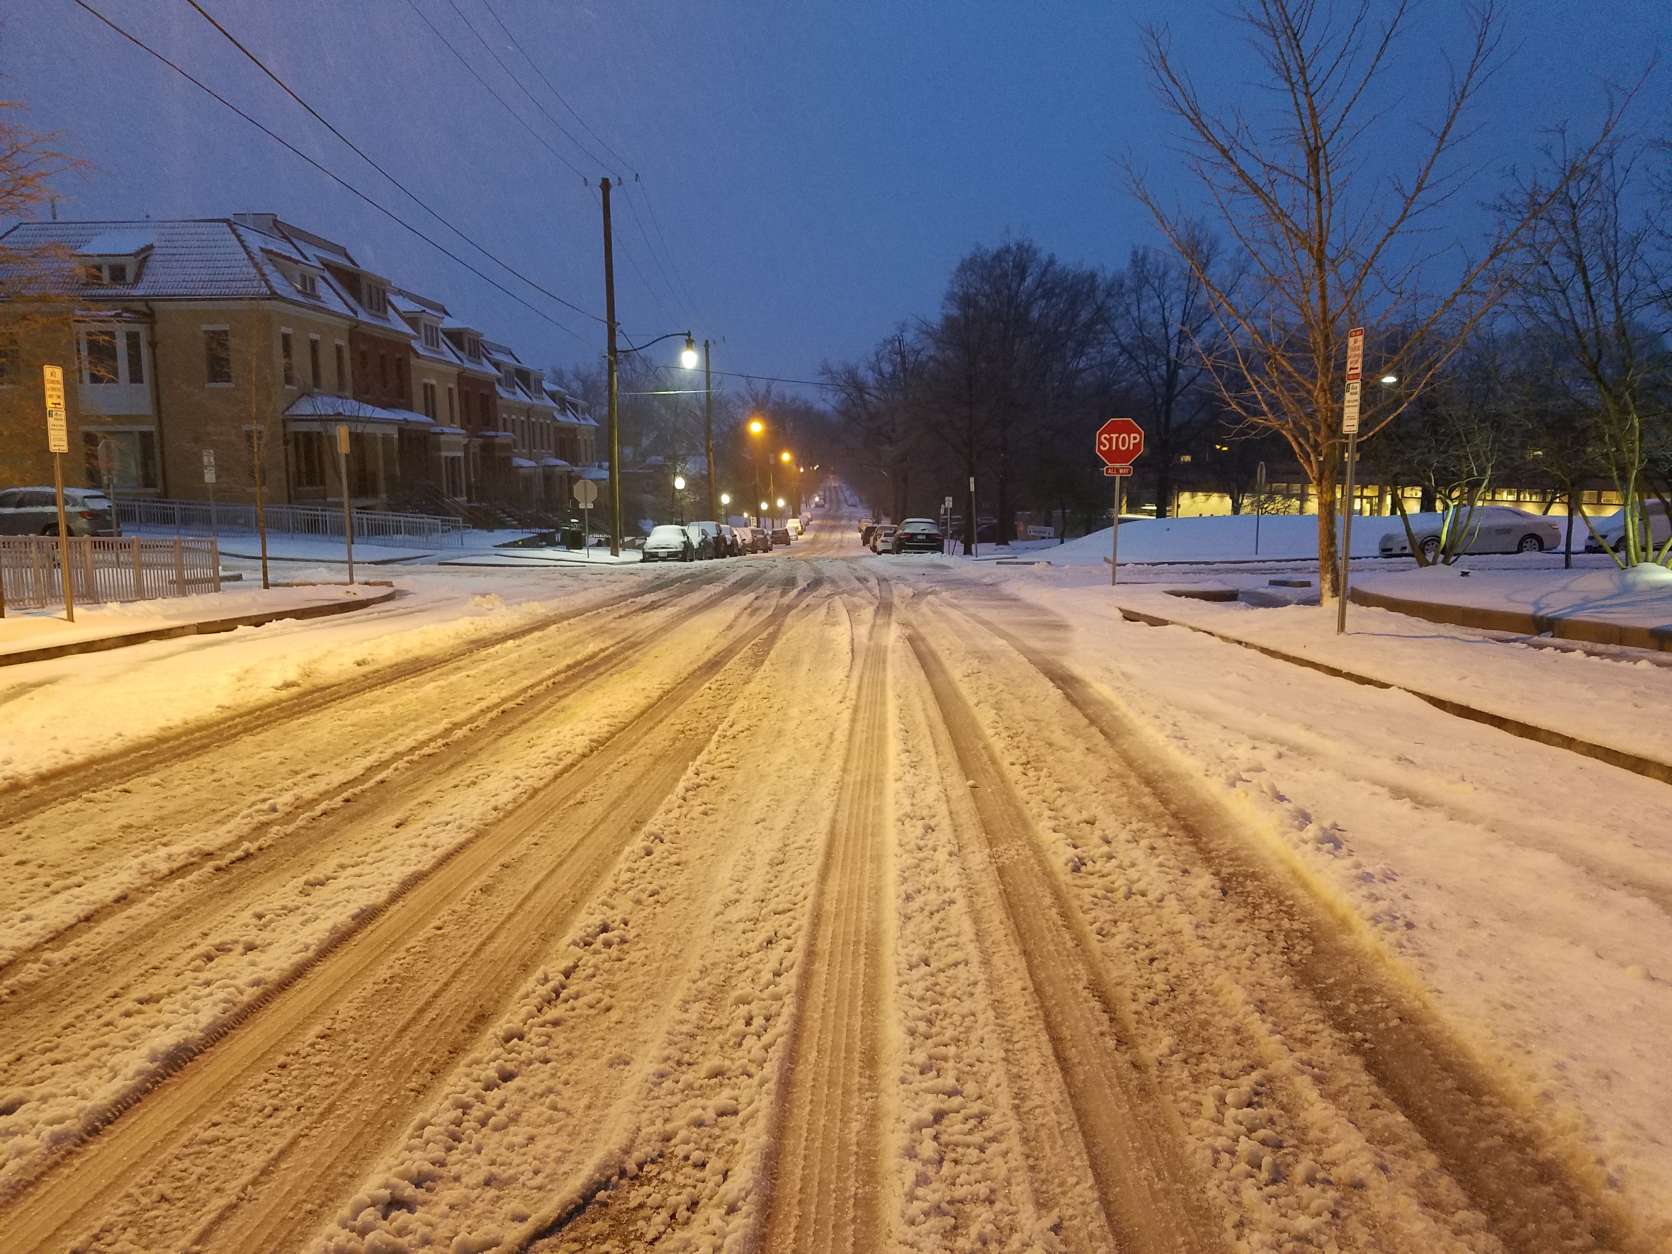 It's a quiet morning on the roads Tuesday in Northwest D.C. (WTOP/Will Vitka)